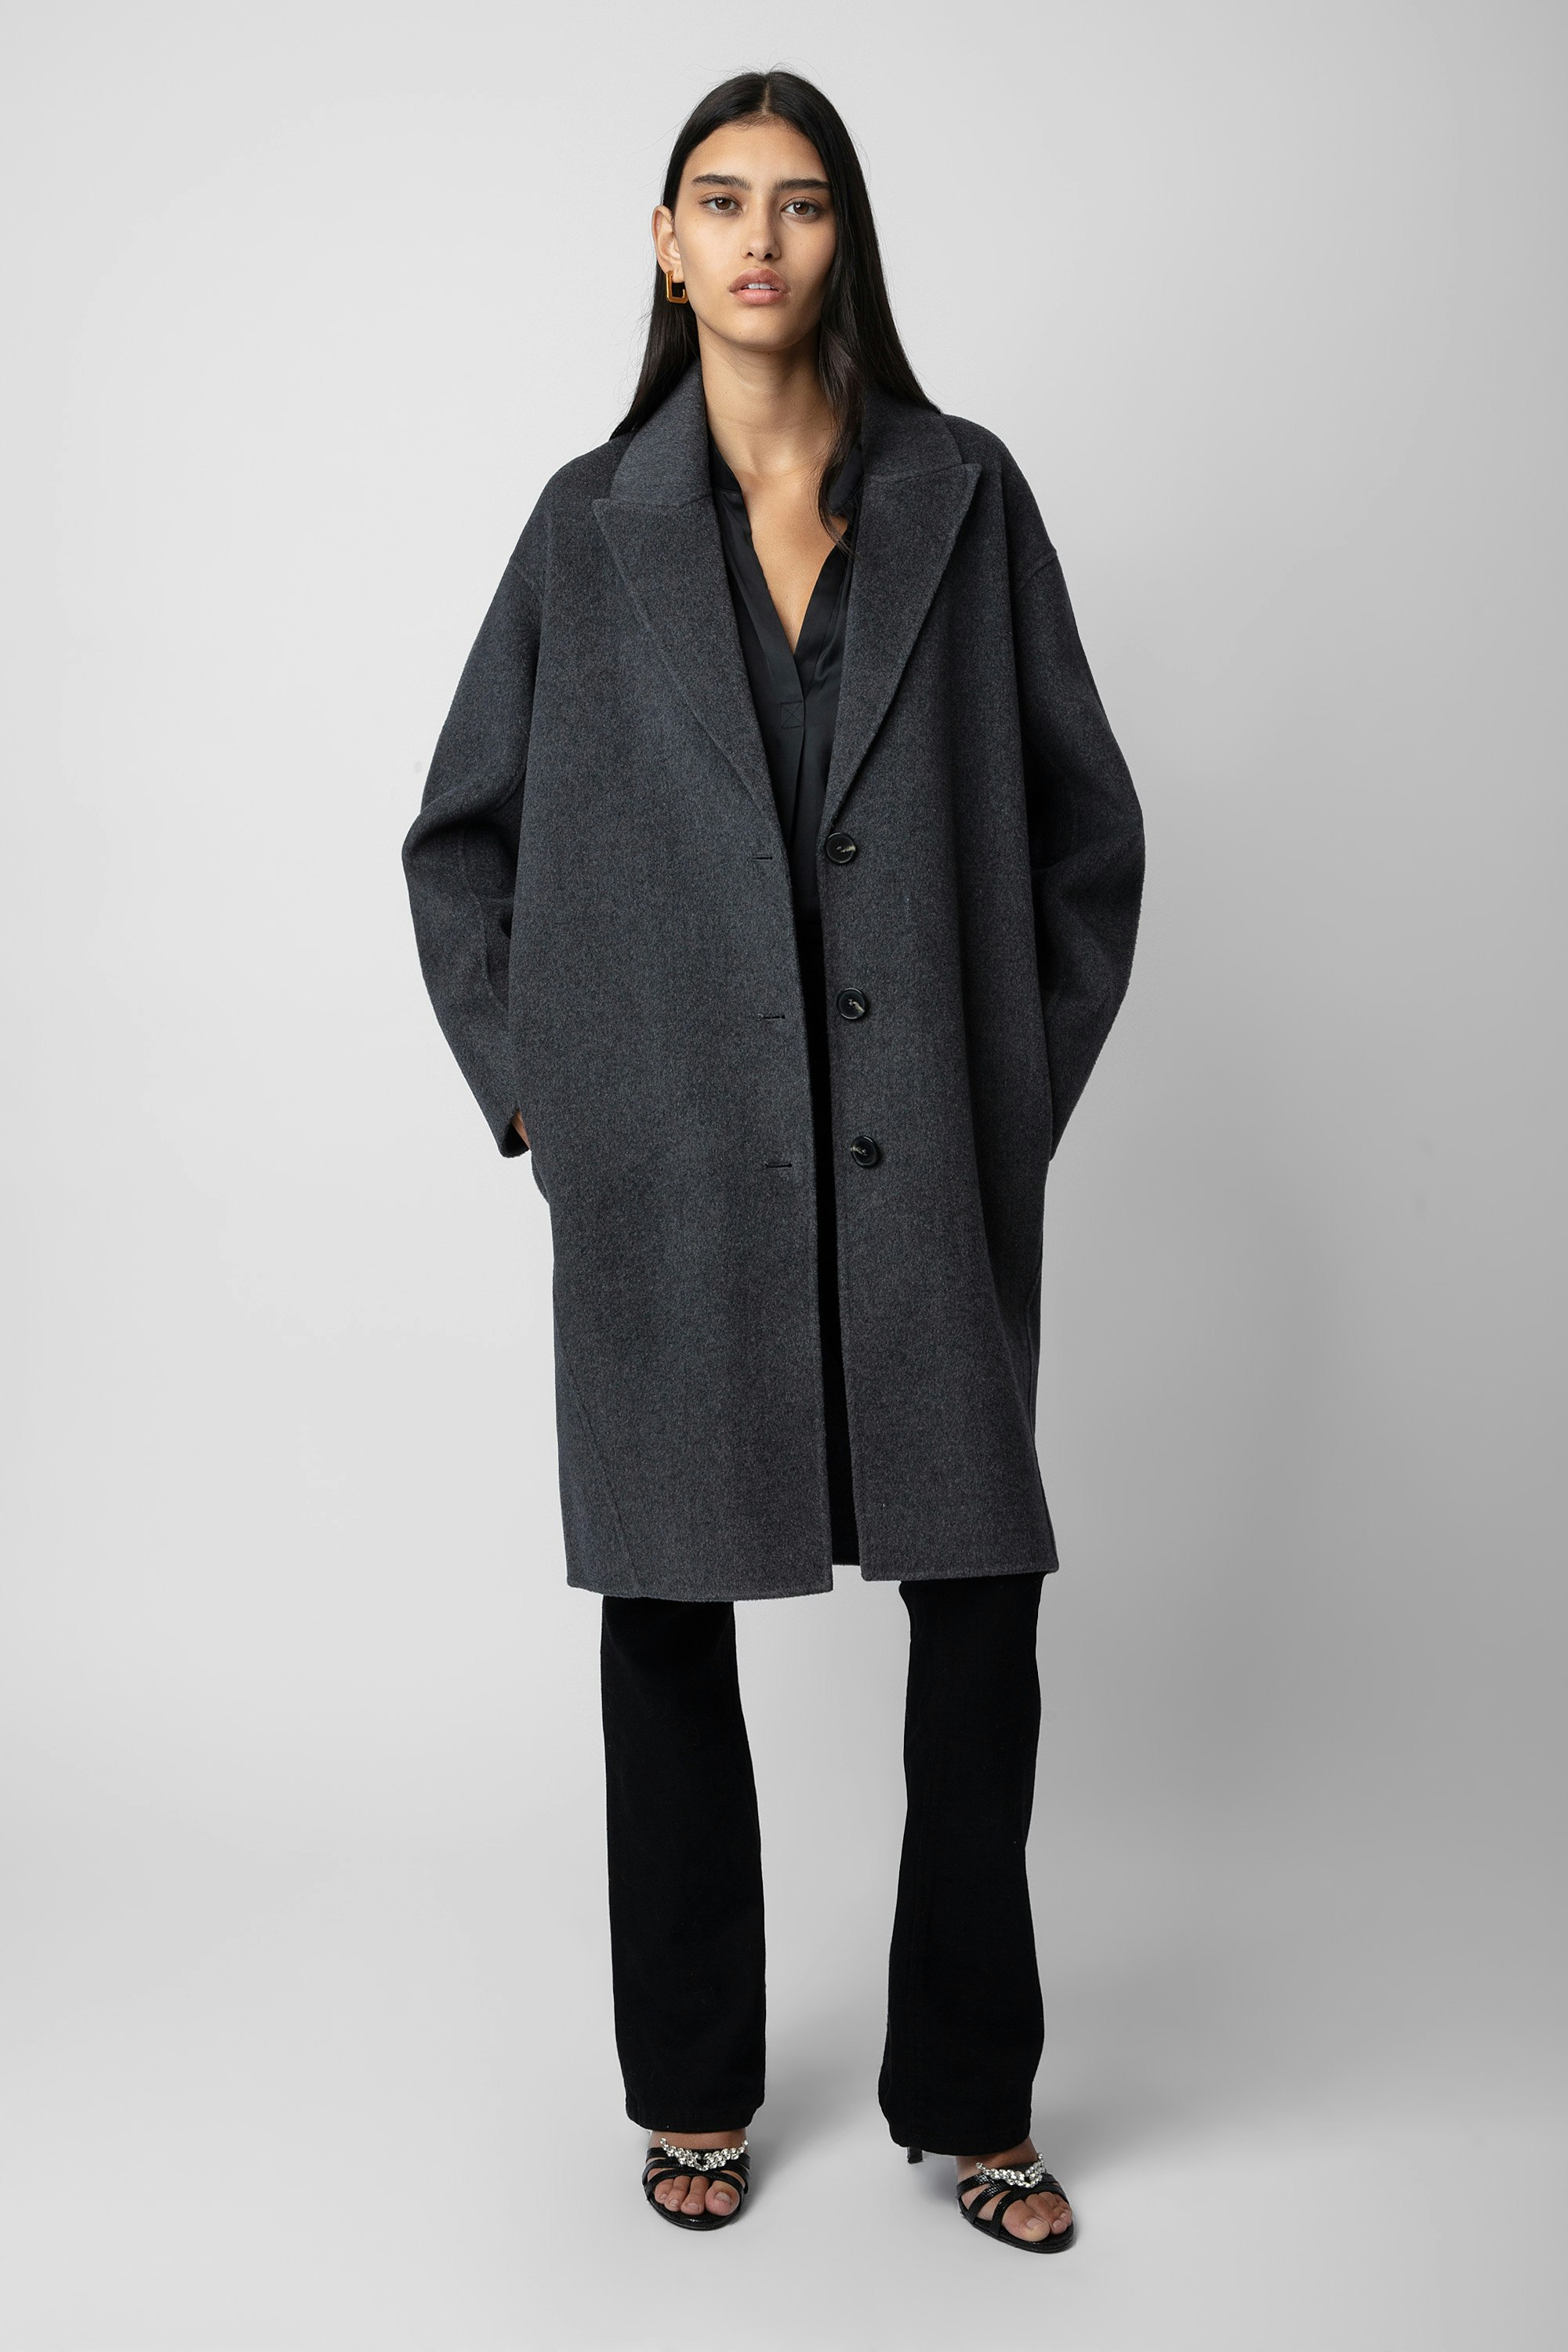 Mady コート - Women's long anthracite coat with buttons